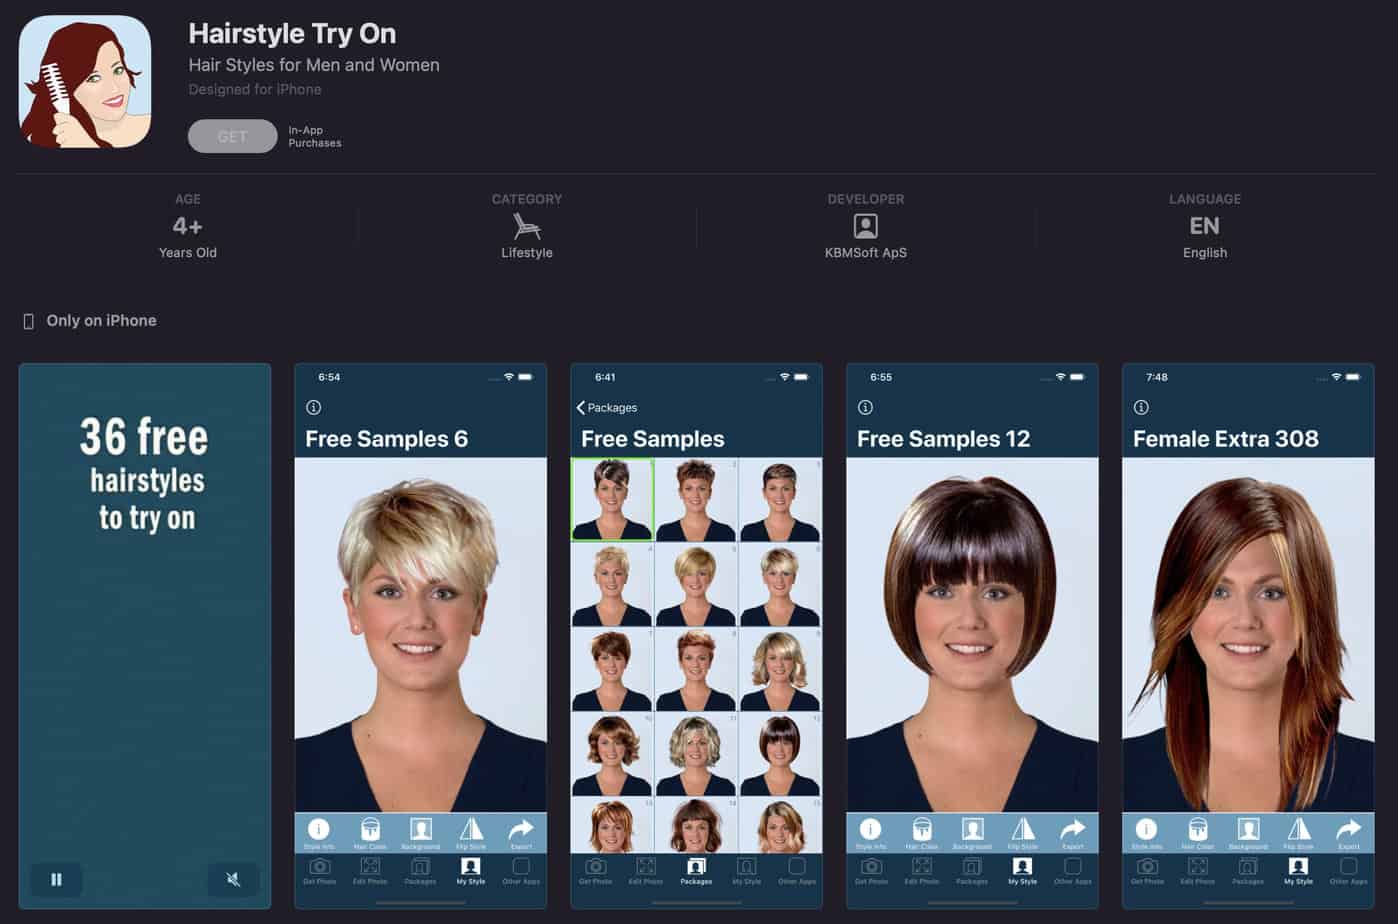 AI Hairstyle Tech: Boost Sales for Your Site - Perfect Corp.